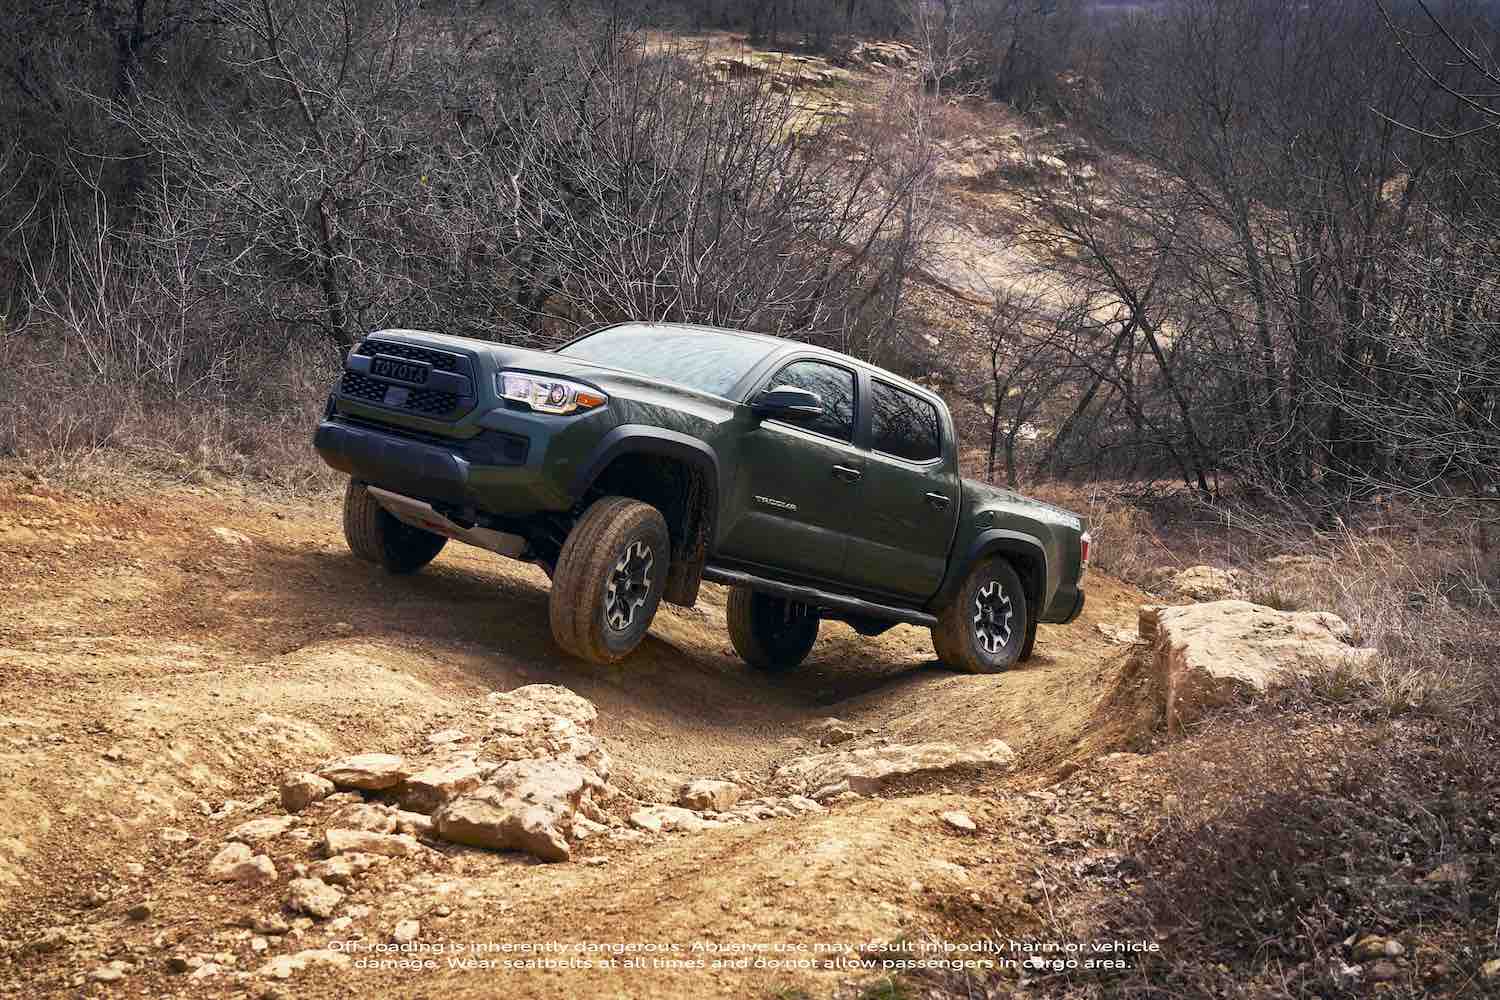 The 2021 Toyota Tacoma going off-roading, the Tacoma TRD Pro is one of the best new off-road pickups according to Edmunds